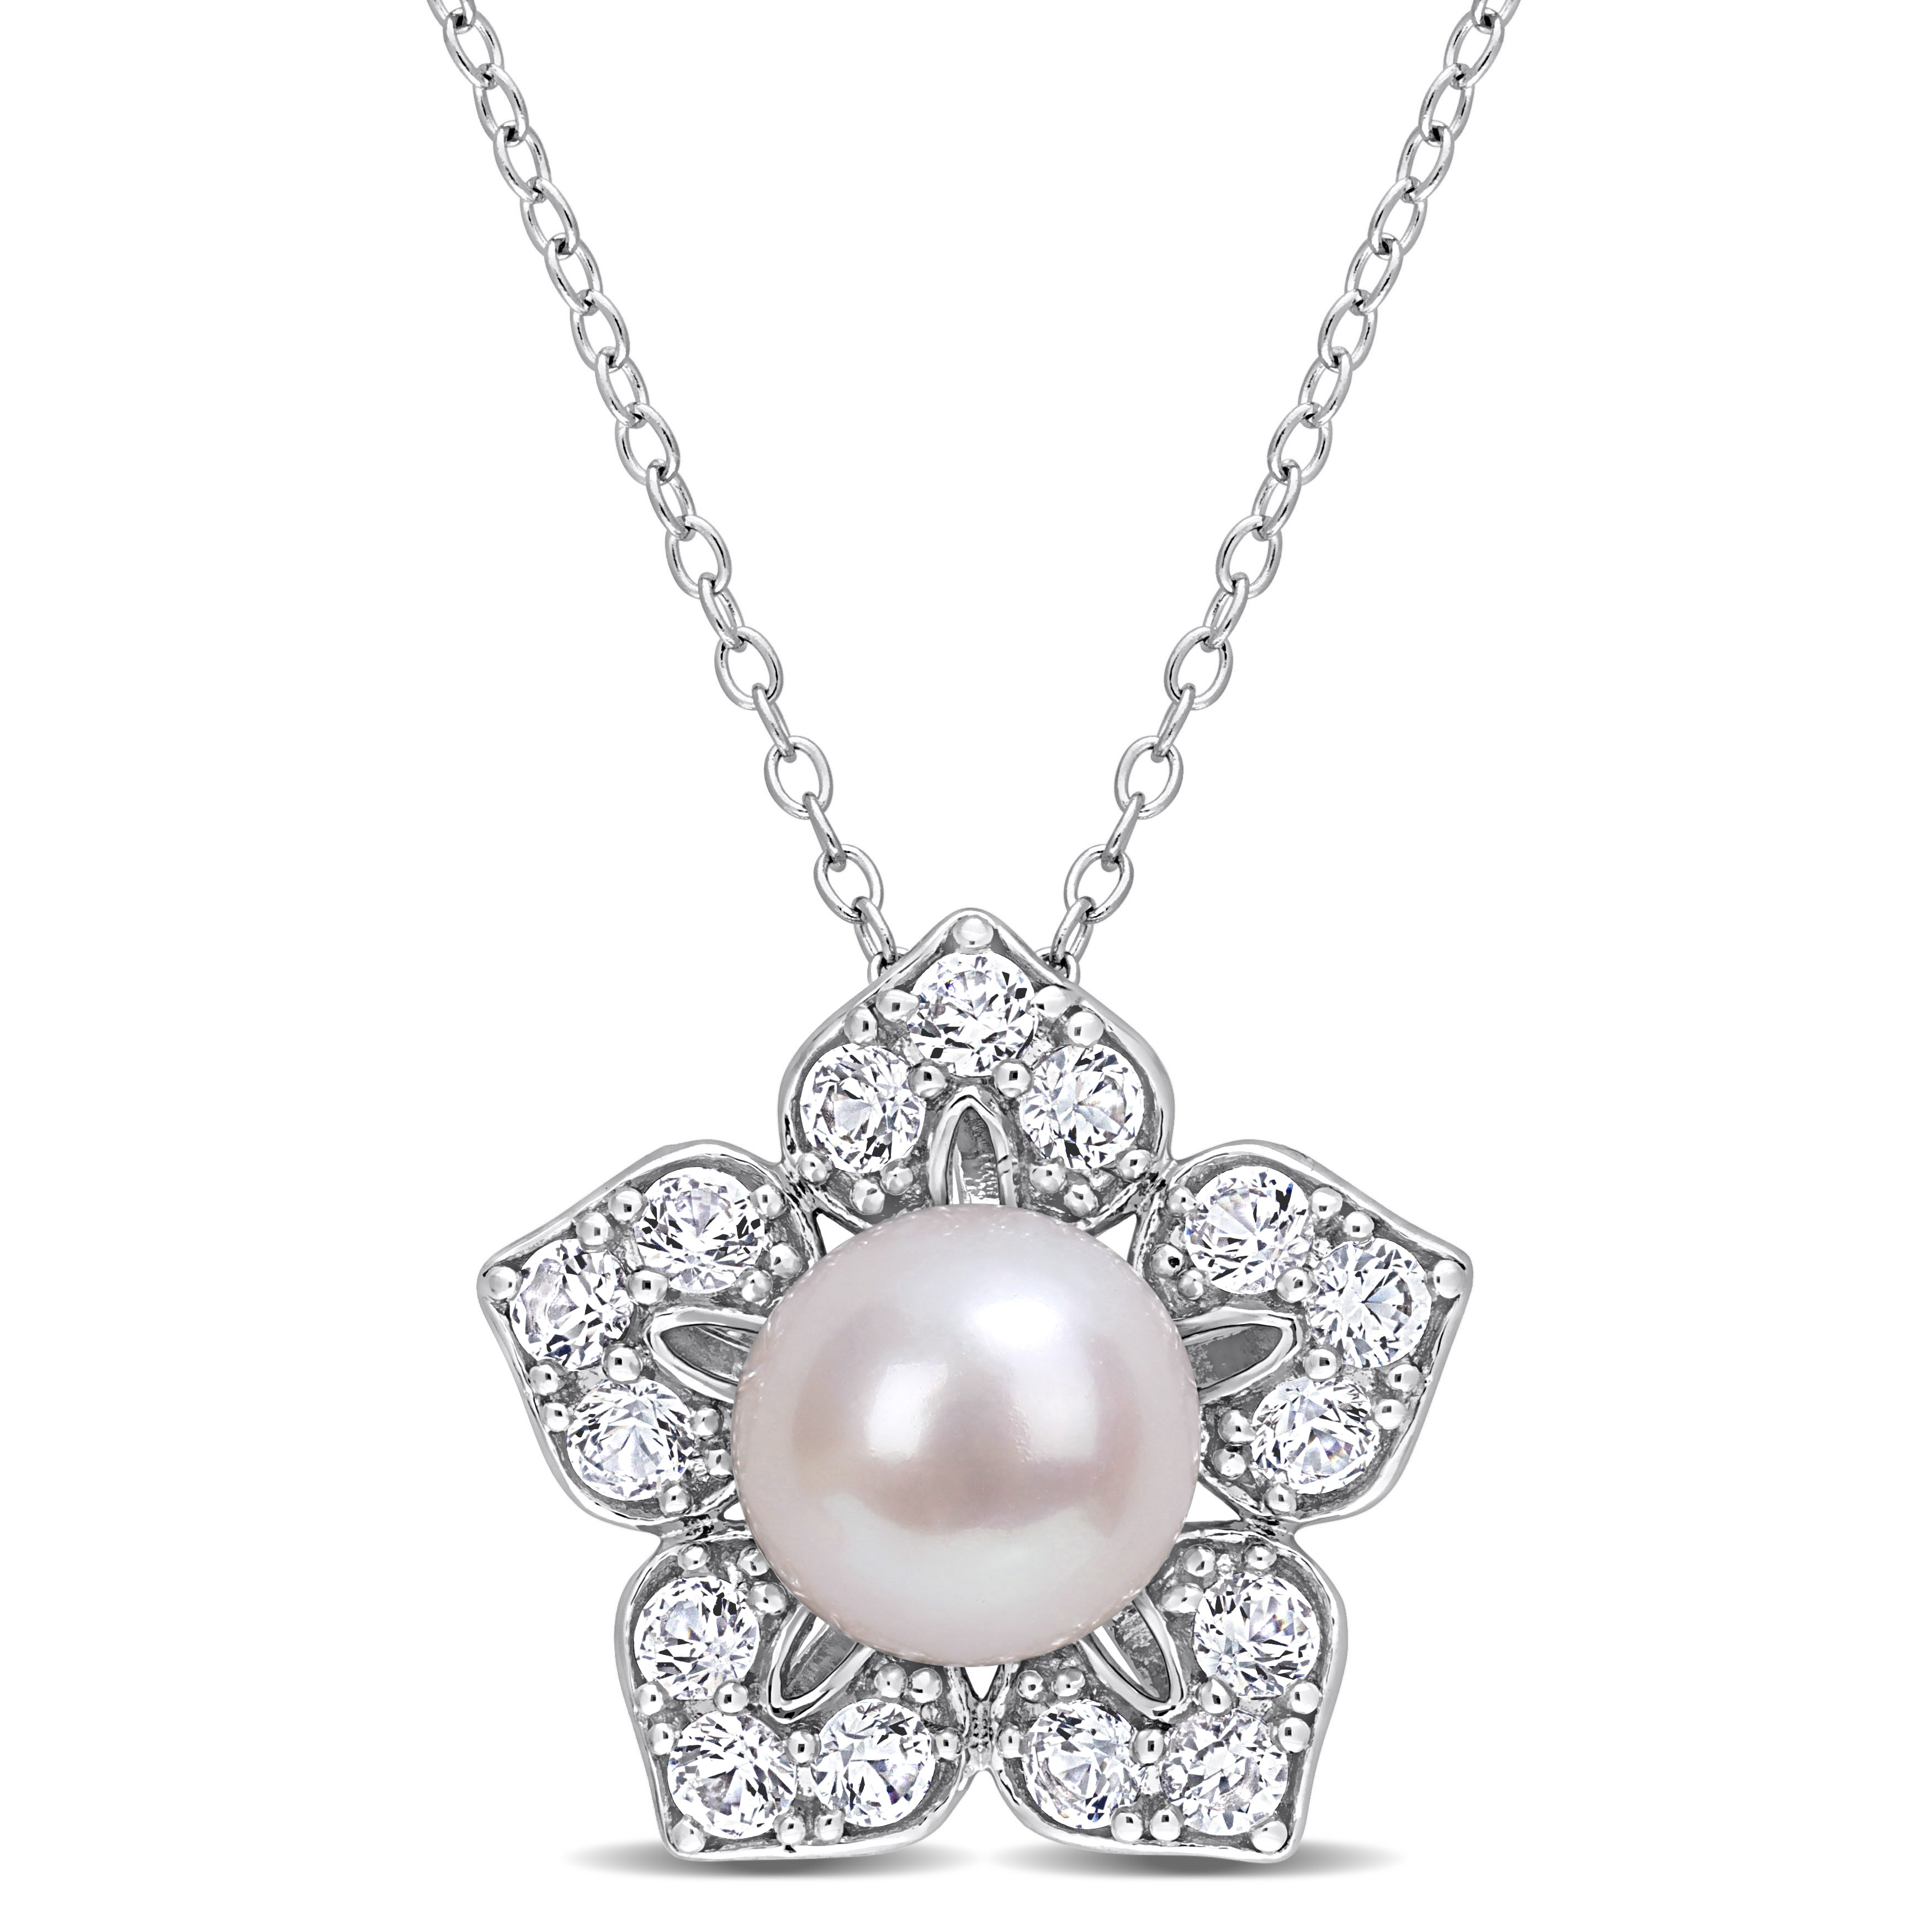 8-9 MM White Freshwater Cultured Pearl and 1 1/3ct TGW Created White Sapphire Flower Pendant with Chain in Sterling Silver